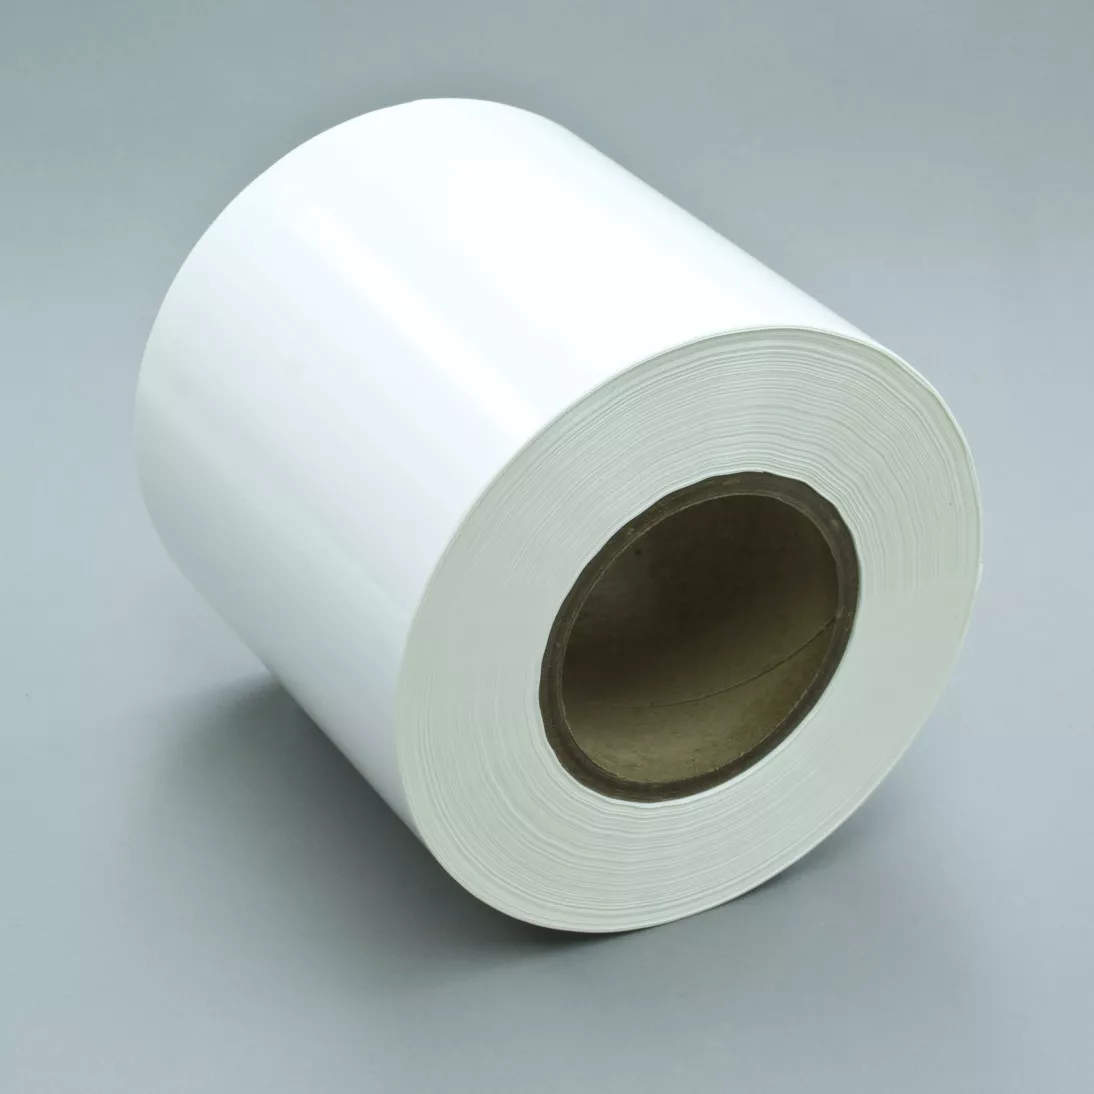 3M™ Press Printable Label Material 8418, White Polyester Gloss, 12 in x 333 yd, 1 roll per case